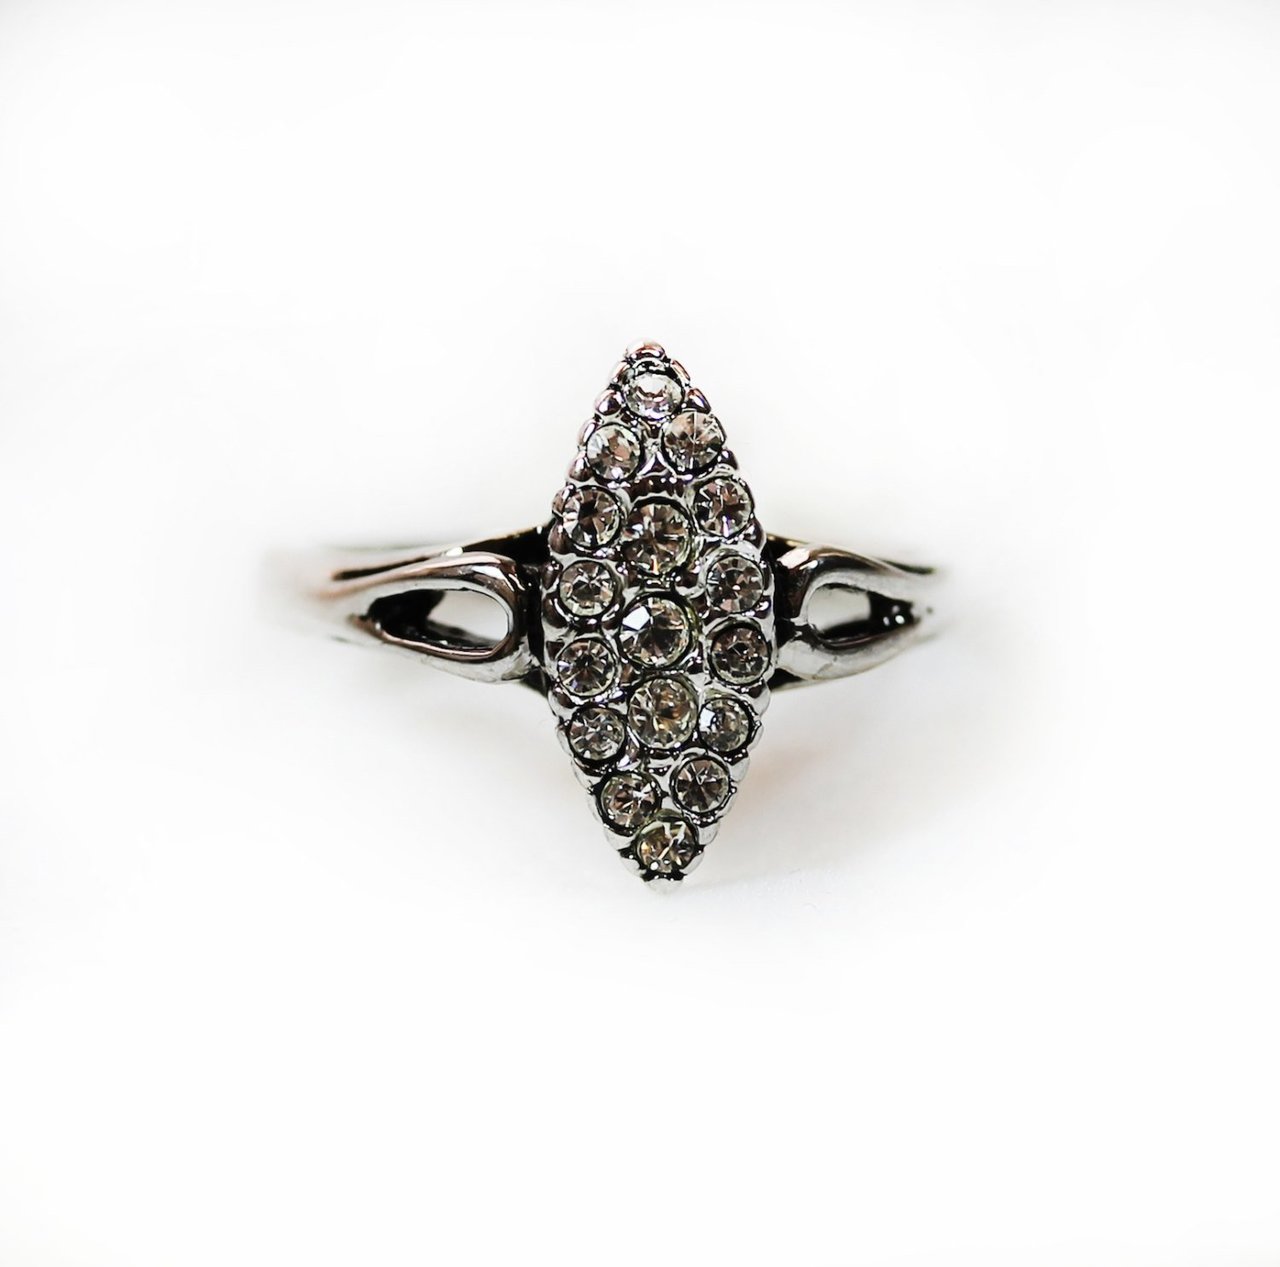 Vintage Pave Ring with Clear Austrian Crystals Antiqued 18kt White gold Electroplated Made in USA